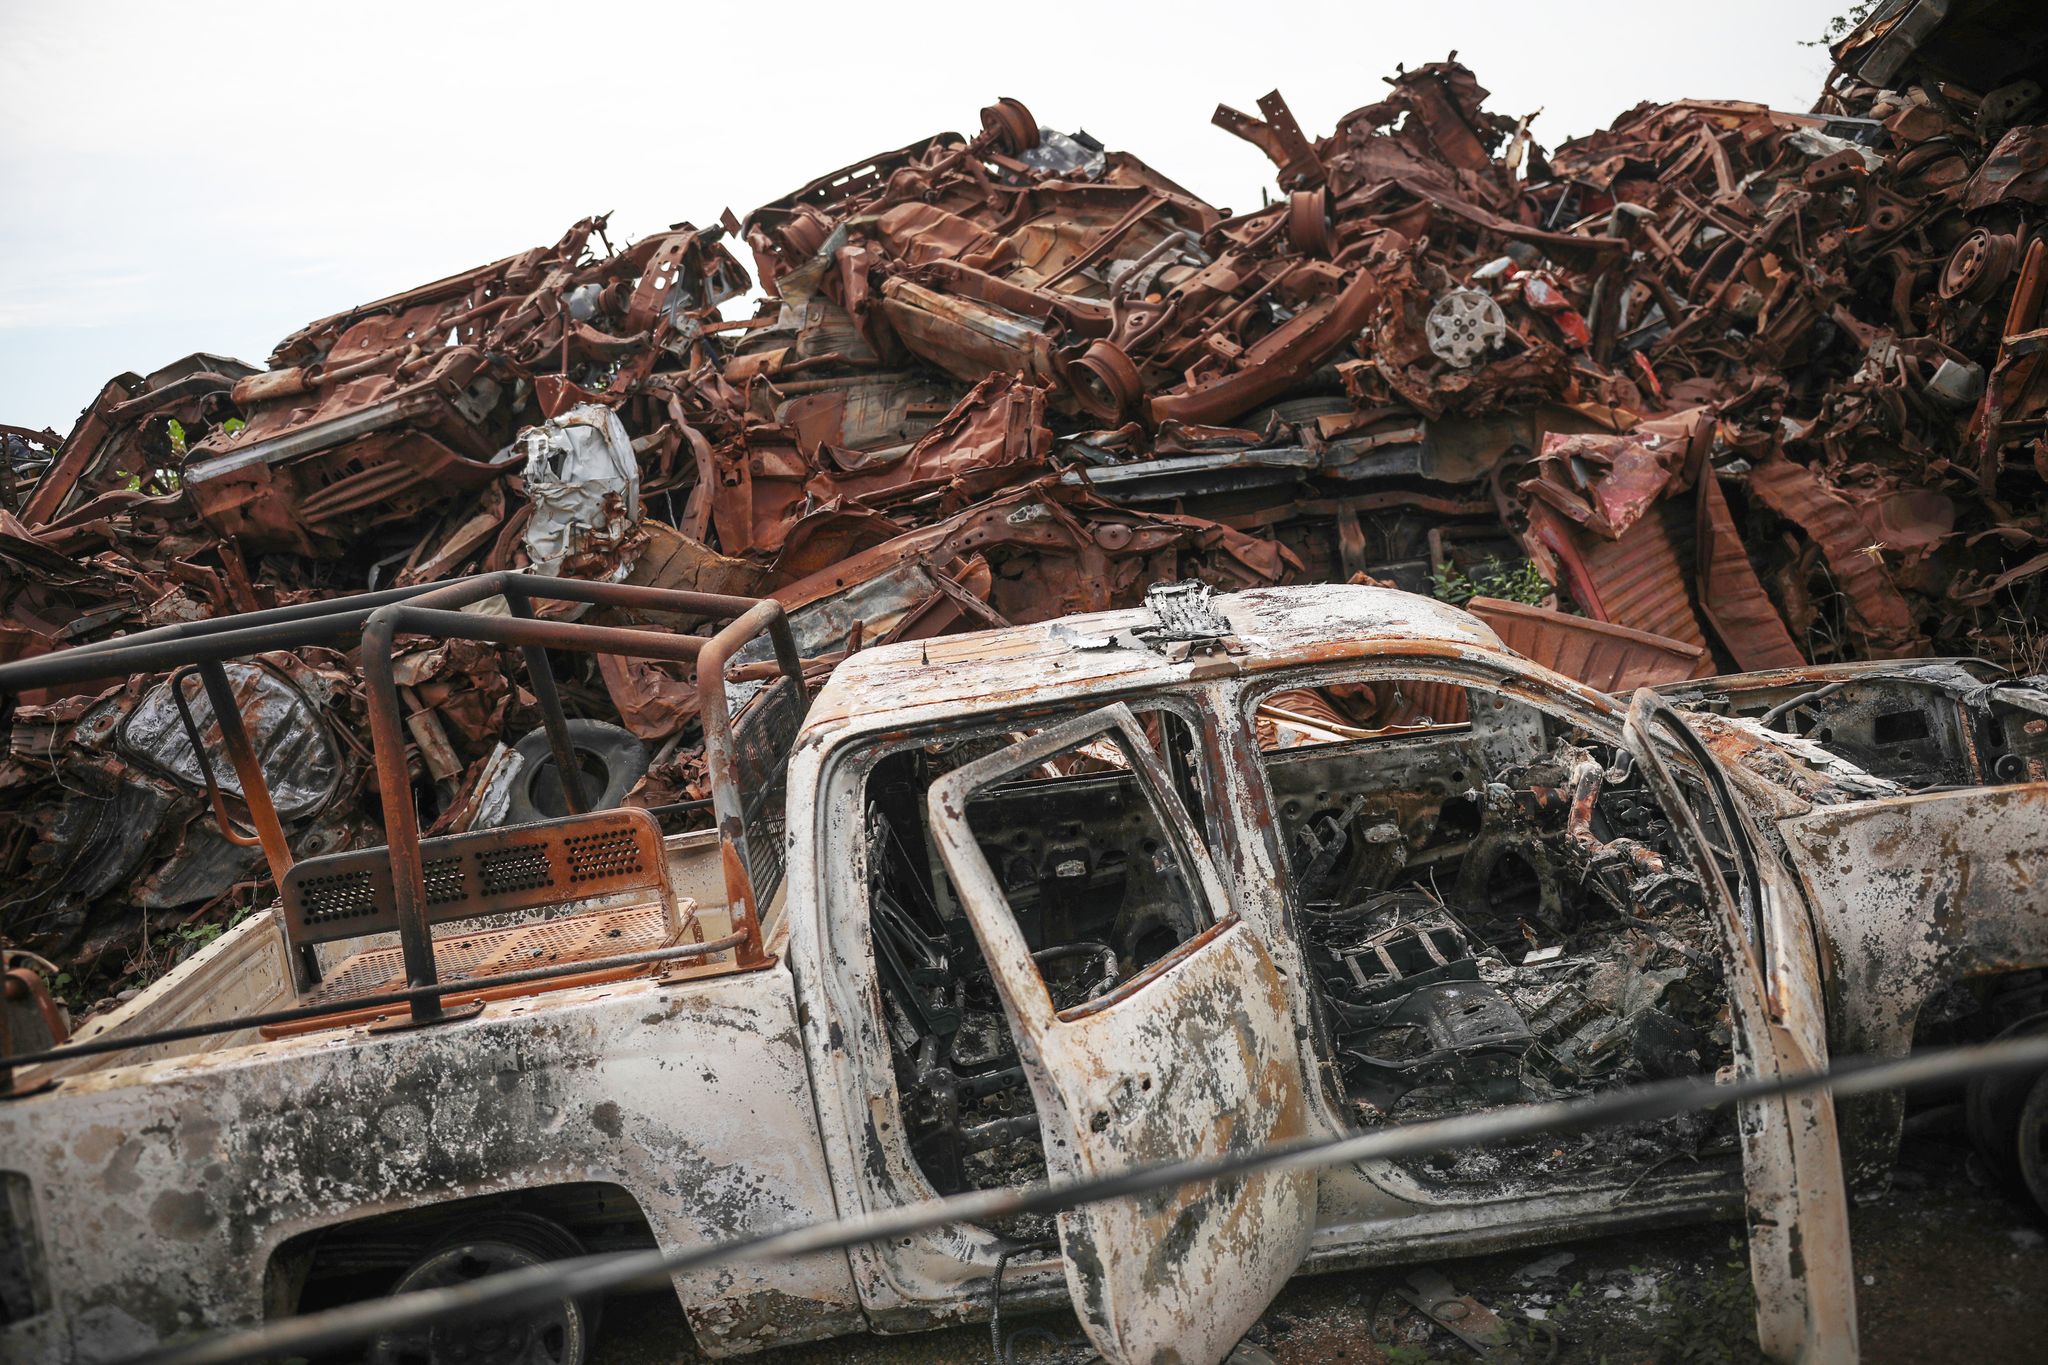 the junkyard where the burned out vehicles were taken following the attack